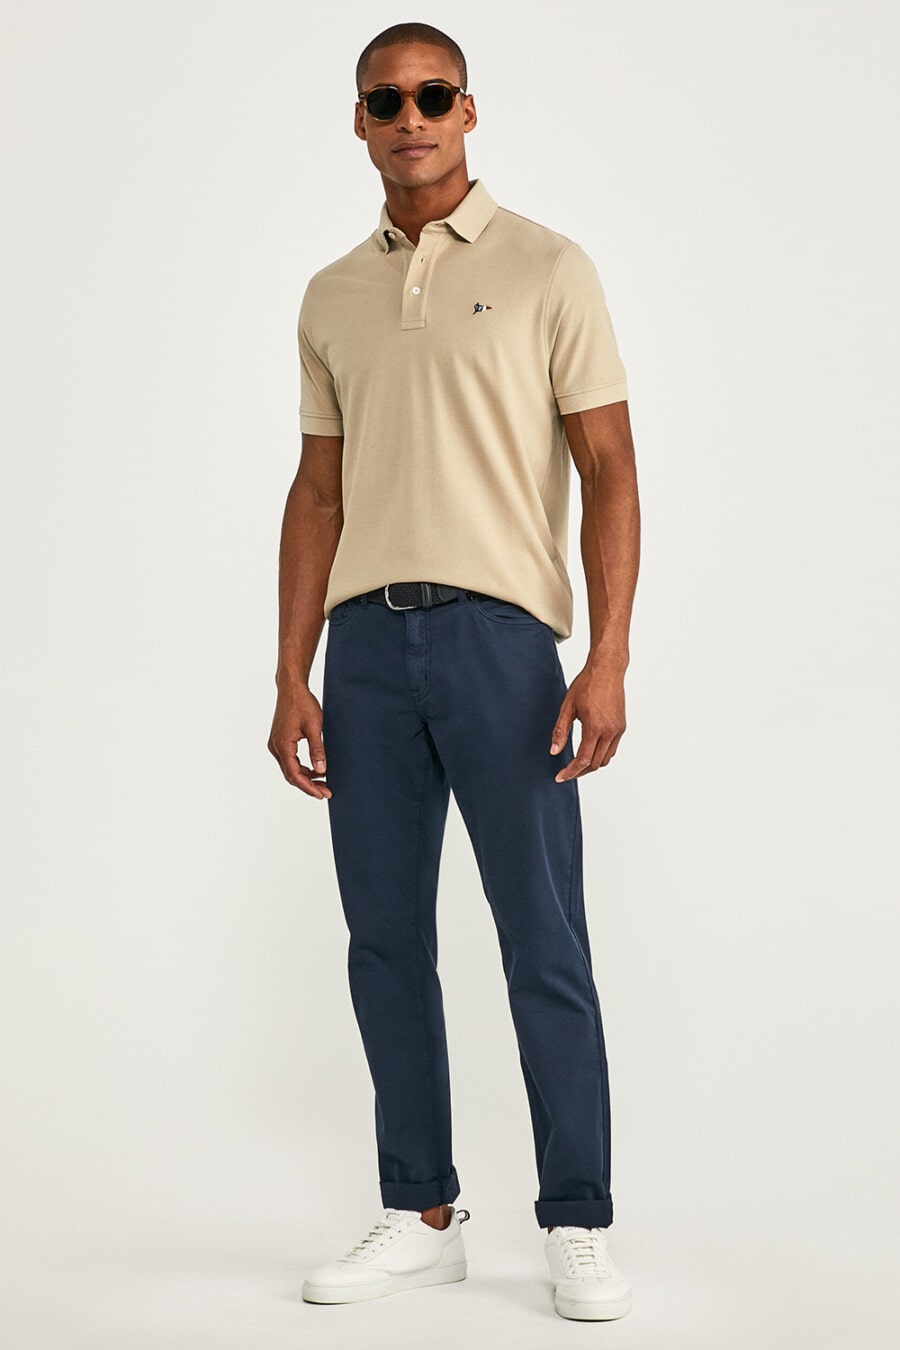 Men's navy chinos, light brown polo shirt, round lens sunglasses and white sneakers worn sockless outfit